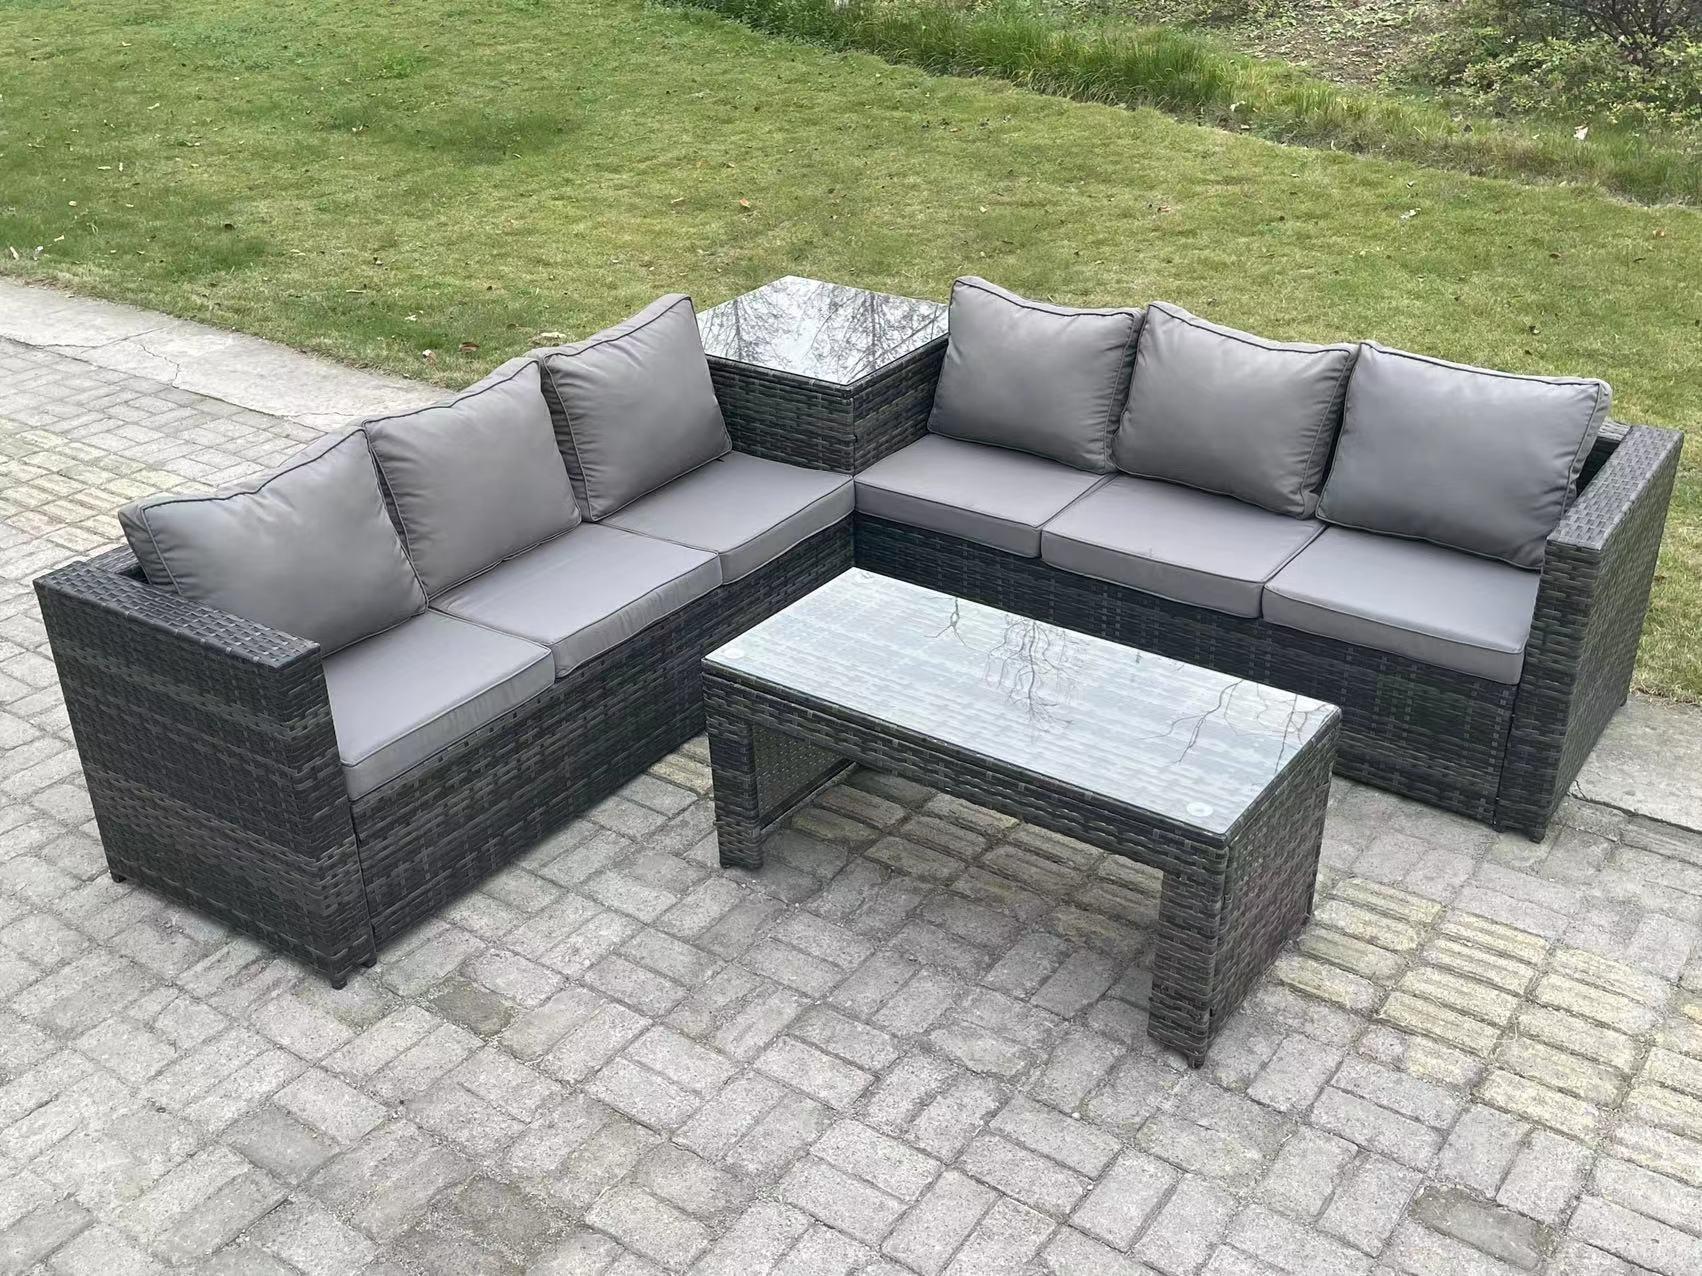 6 Seater Rattan Corner Sofa Set With Square Side Table And Oblong Rectangular Coffee Tea Table